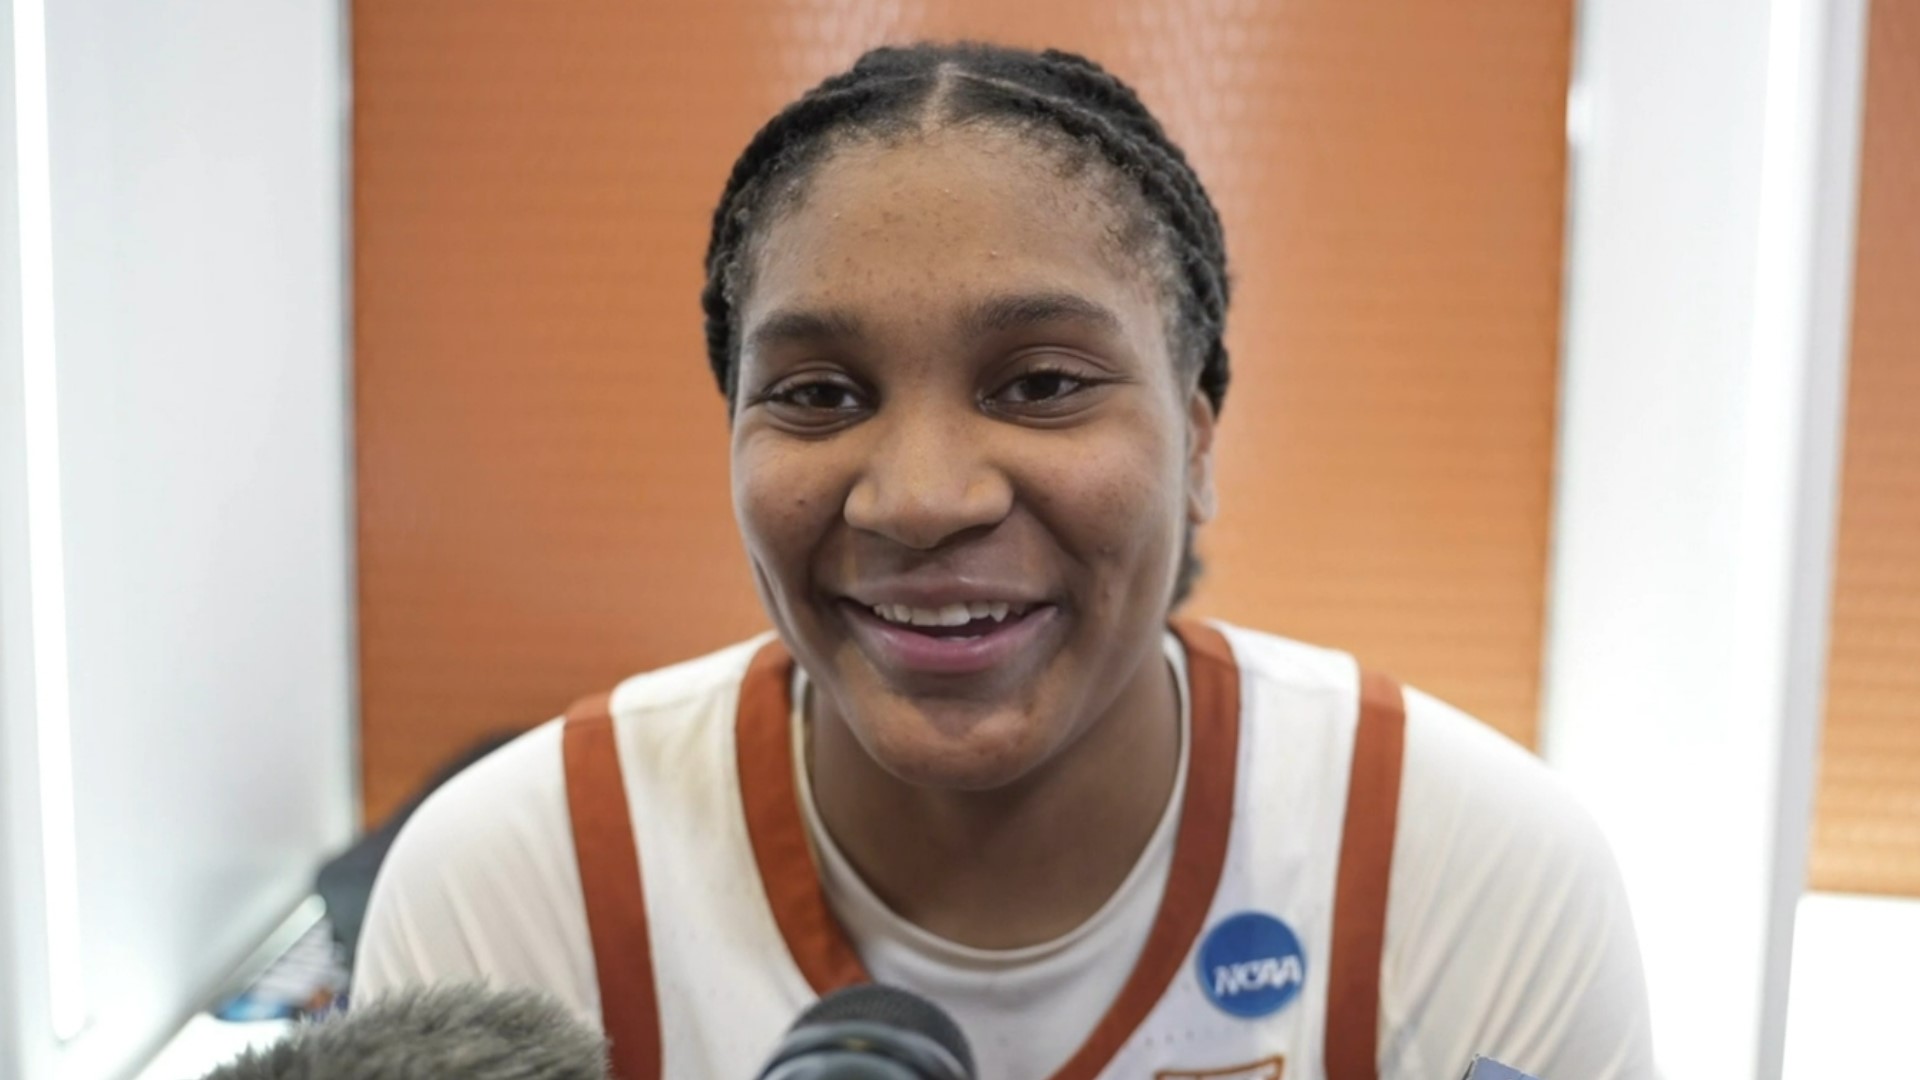 Texas Women's Basketball players spoke to the media after their win over Alabama on March 24. The Longhorns now advance to the Sweet 16 of the NCAA Tournament.